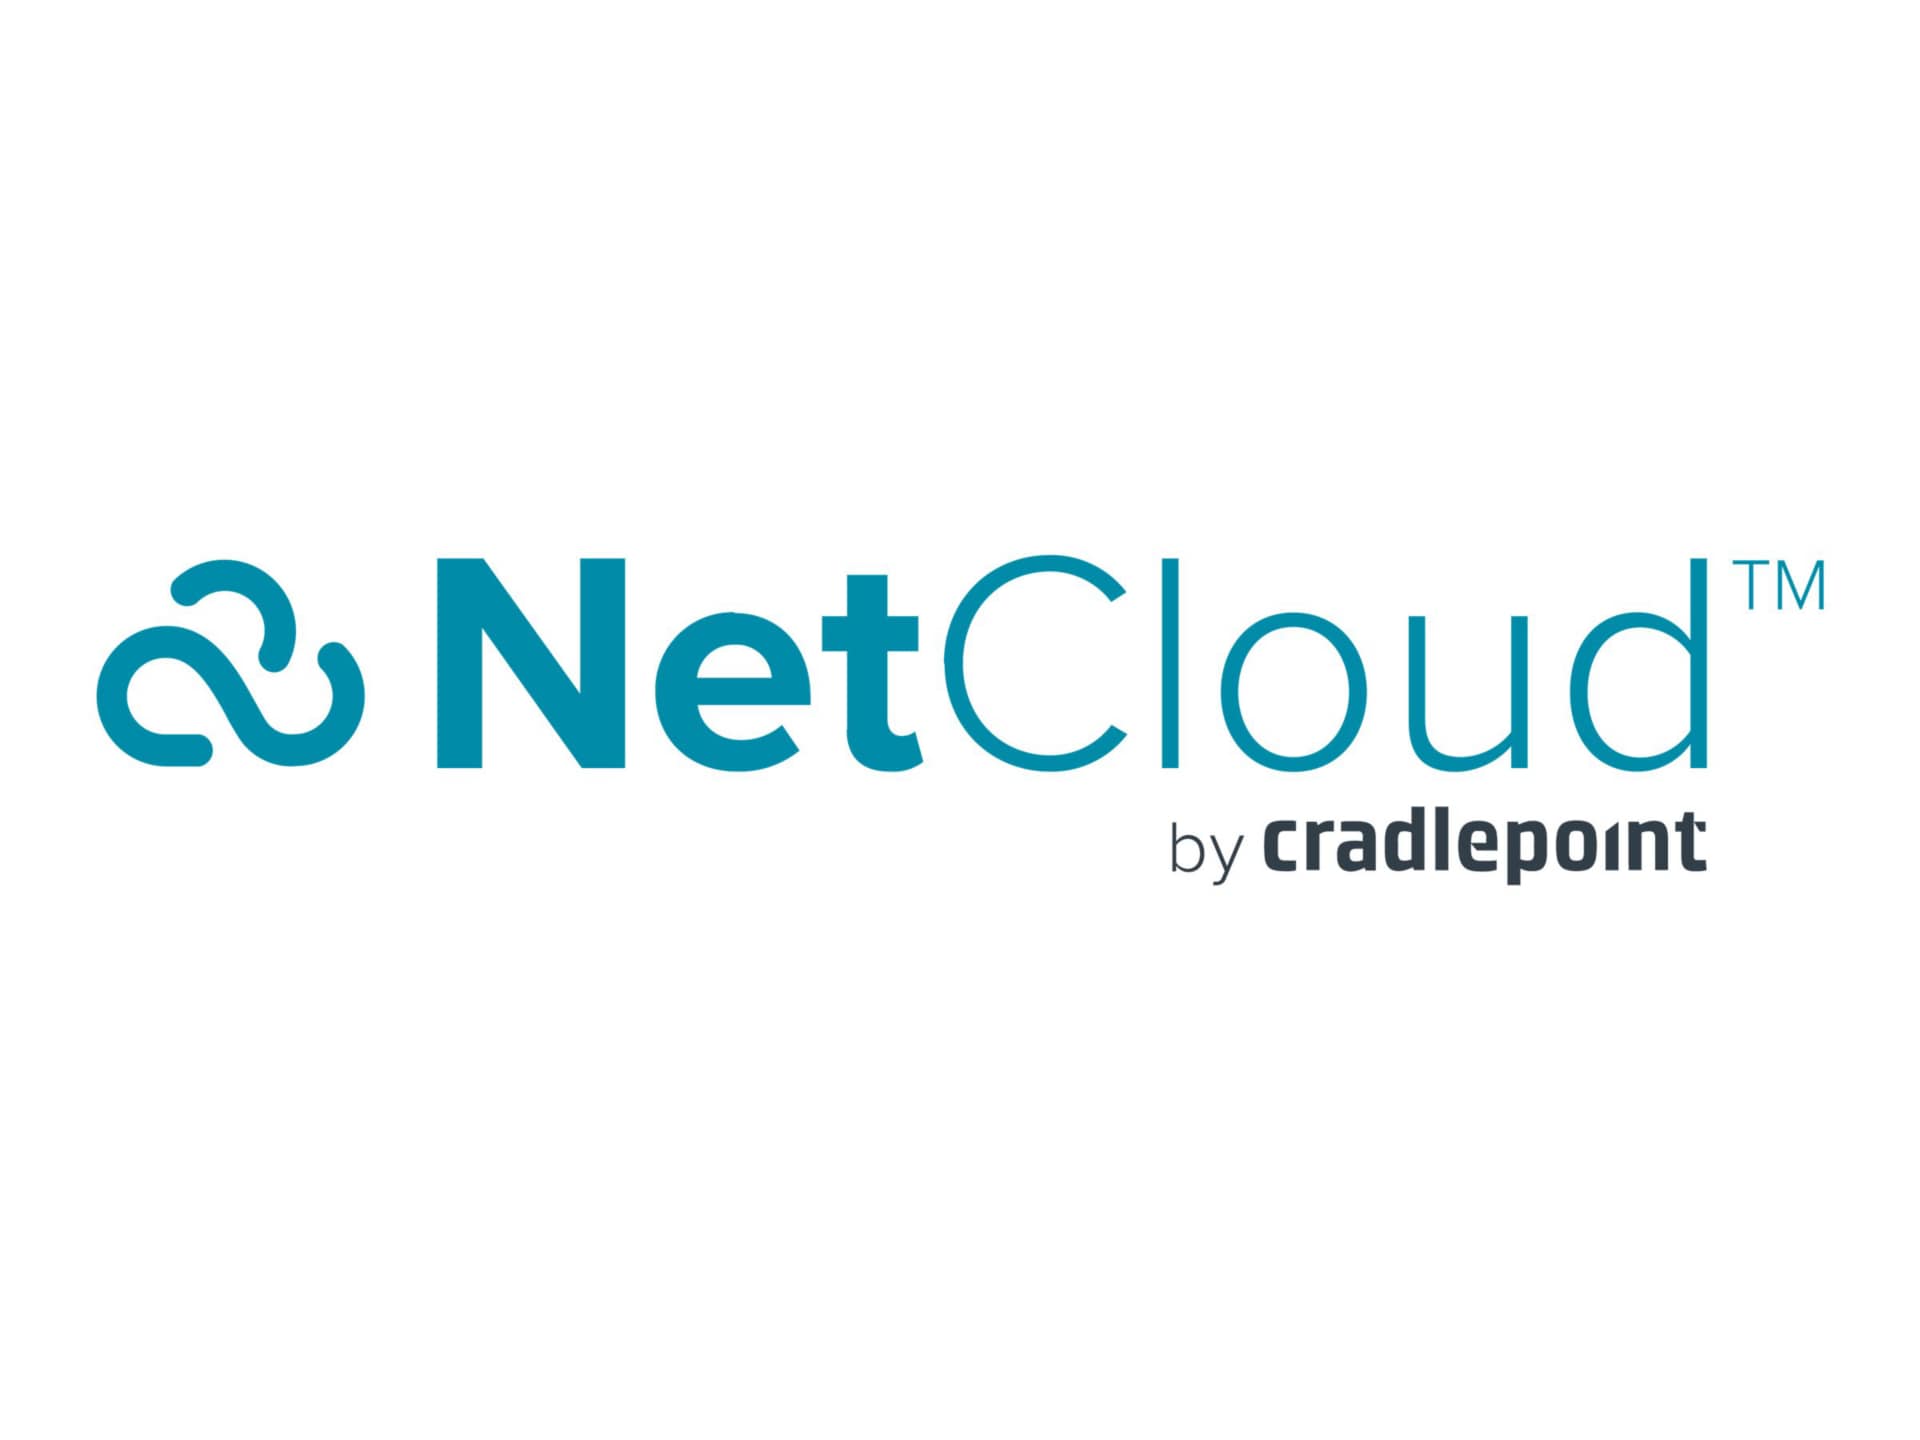 Cradlepoint NetCloud Advanced for Mobile Routers (Enterprise) - subscription license renewal (1 year) - 1 license